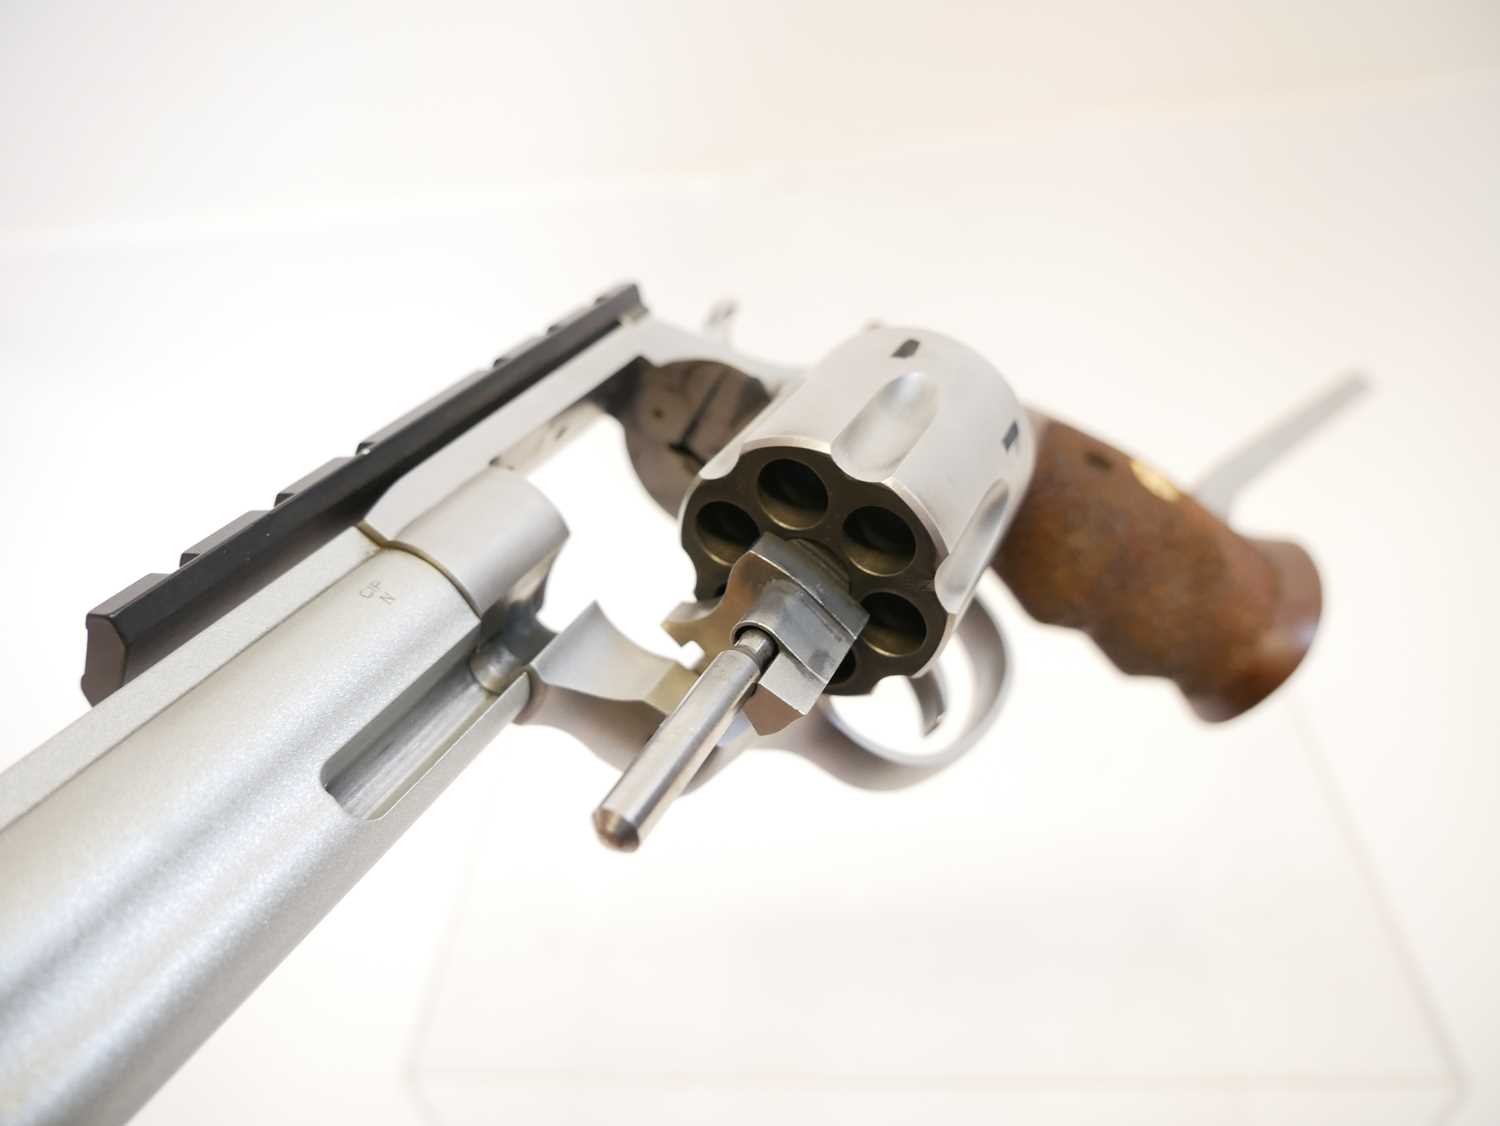 Alfa Brno .357 long barrel revolver, serial number 7351200627, 12 inch barrel, fitted with Picatinny - Image 9 of 13